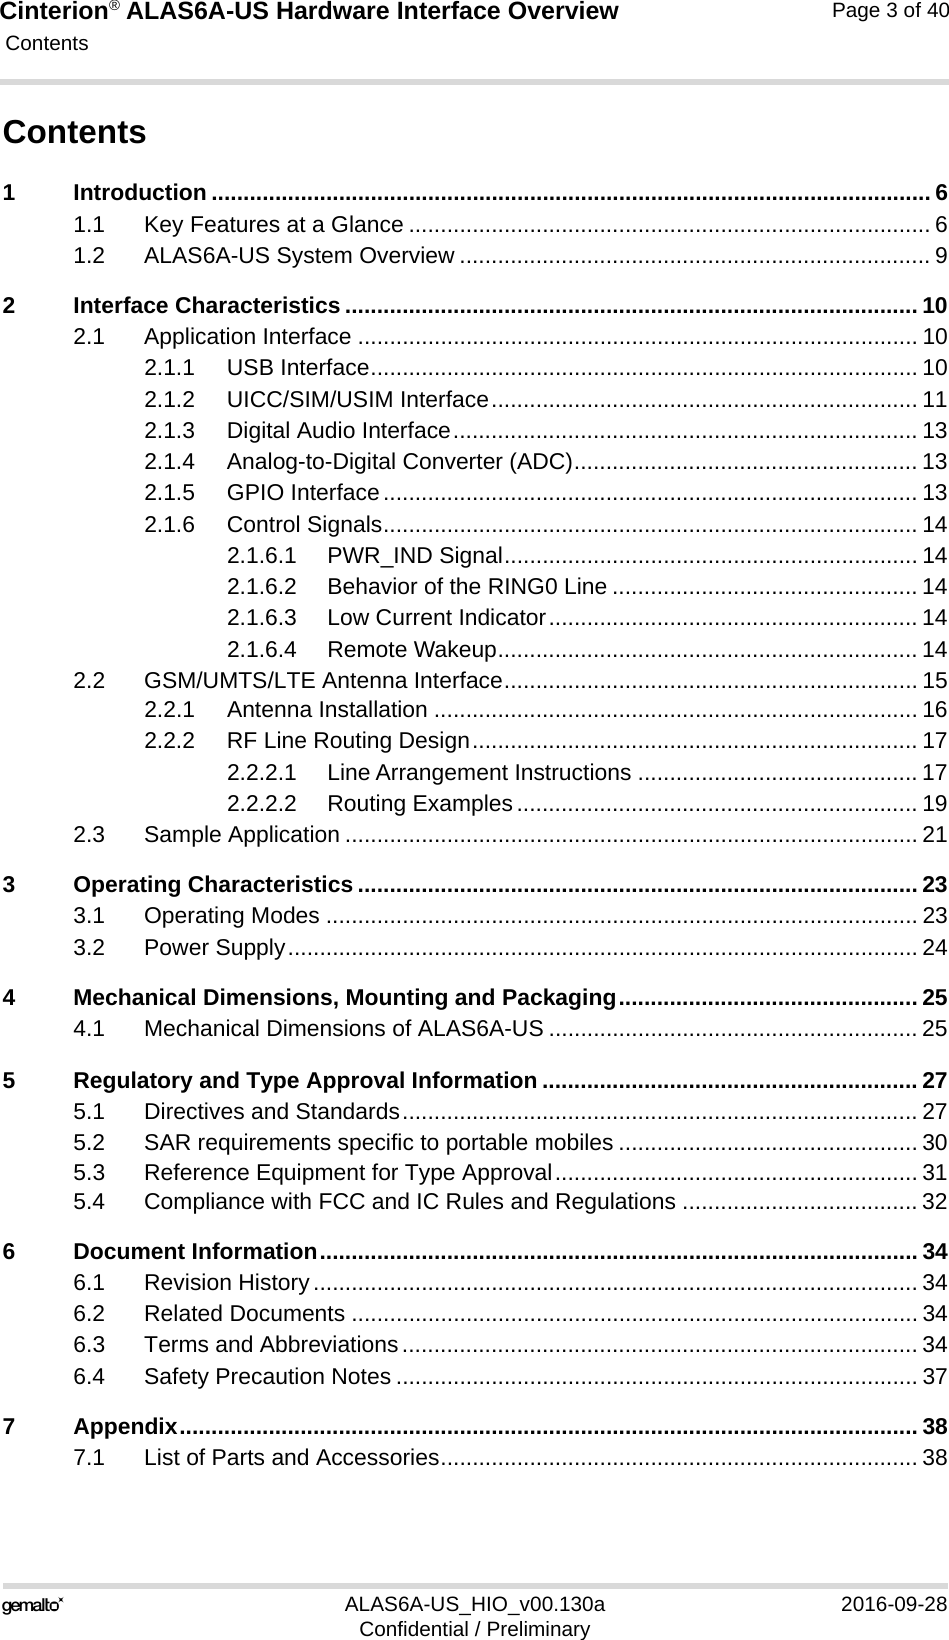 Cinterion® ALAS6A-US Hardware Interface Overview Contents40ALAS6A-US_HIO_v00.130a 2016-09-28Confidential / PreliminaryPage 3 of 40Contents1 Introduction ................................................................................................................. 61.1 Key Features at a Glance .................................................................................. 61.2 ALAS6A-US System Overview .......................................................................... 92 Interface Characteristics .......................................................................................... 102.1 Application Interface ........................................................................................ 102.1.1 USB Interface...................................................................................... 102.1.2 UICC/SIM/USIM Interface................................................................... 112.1.3 Digital Audio Interface......................................................................... 132.1.4 Analog-to-Digital Converter (ADC)...................................................... 132.1.5 GPIO Interface.................................................................................... 132.1.6 Control Signals.................................................................................... 142.1.6.1 PWR_IND Signal................................................................. 142.1.6.2 Behavior of the RING0 Line ................................................ 142.1.6.3 Low Current Indicator.......................................................... 142.1.6.4 Remote Wakeup.................................................................. 142.2 GSM/UMTS/LTE Antenna Interface................................................................. 152.2.1 Antenna Installation ............................................................................ 162.2.2 RF Line Routing Design...................................................................... 172.2.2.1 Line Arrangement Instructions ............................................ 172.2.2.2 Routing Examples............................................................... 192.3 Sample Application .......................................................................................... 213 Operating Characteristics ........................................................................................ 233.1 Operating Modes ............................................................................................. 233.2 Power Supply................................................................................................... 244 Mechanical Dimensions, Mounting and Packaging............................................... 254.1 Mechanical Dimensions of ALAS6A-US .......................................................... 255 Regulatory and Type Approval Information ........................................................... 275.1 Directives and Standards................................................................................. 275.2 SAR requirements specific to portable mobiles ............................................... 305.3 Reference Equipment for Type Approval......................................................... 315.4 Compliance with FCC and IC Rules and Regulations ..................................... 326 Document Information.............................................................................................. 346.1 Revision History............................................................................................... 346.2 Related Documents ......................................................................................... 346.3 Terms and Abbreviations................................................................................. 346.4 Safety Precaution Notes .................................................................................. 377 Appendix.................................................................................................................... 387.1 List of Parts and Accessories........................................................................... 38